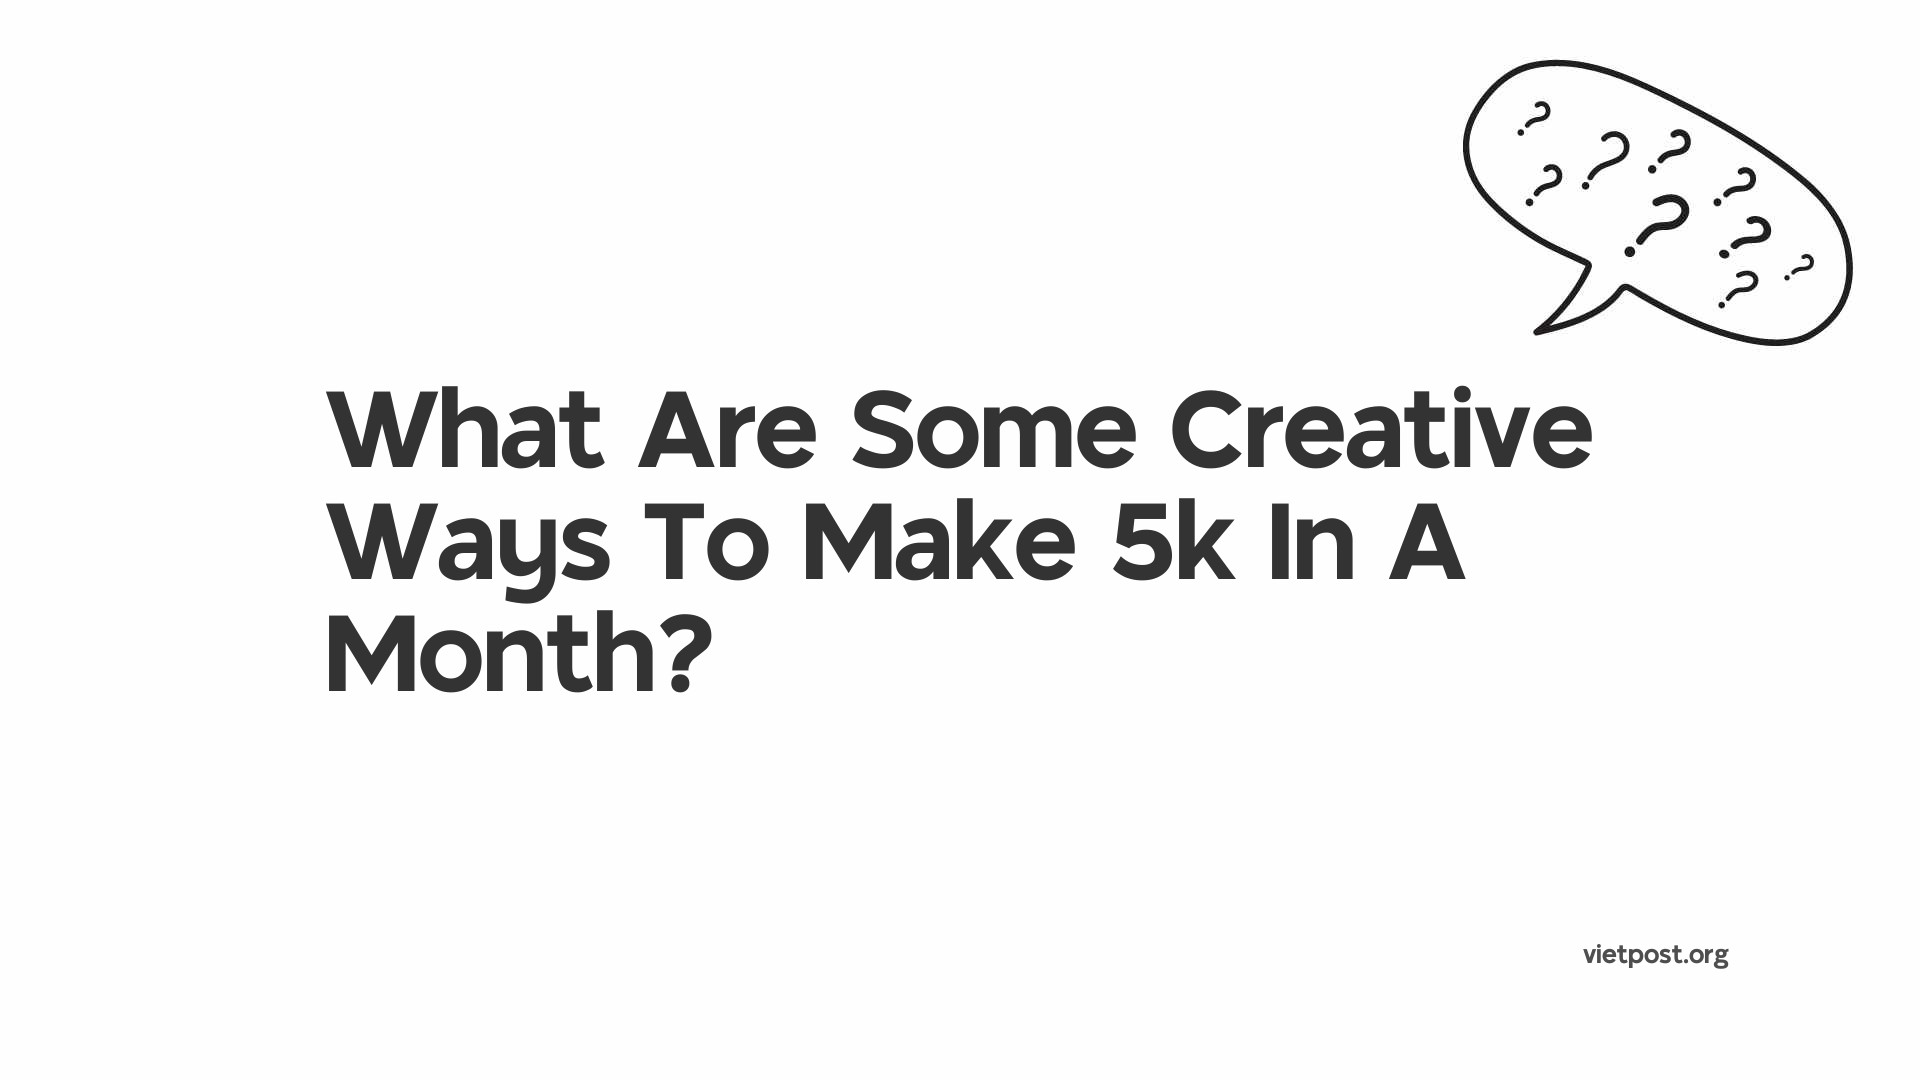 What Are Some Creative Ways To Make 5k In A Month?